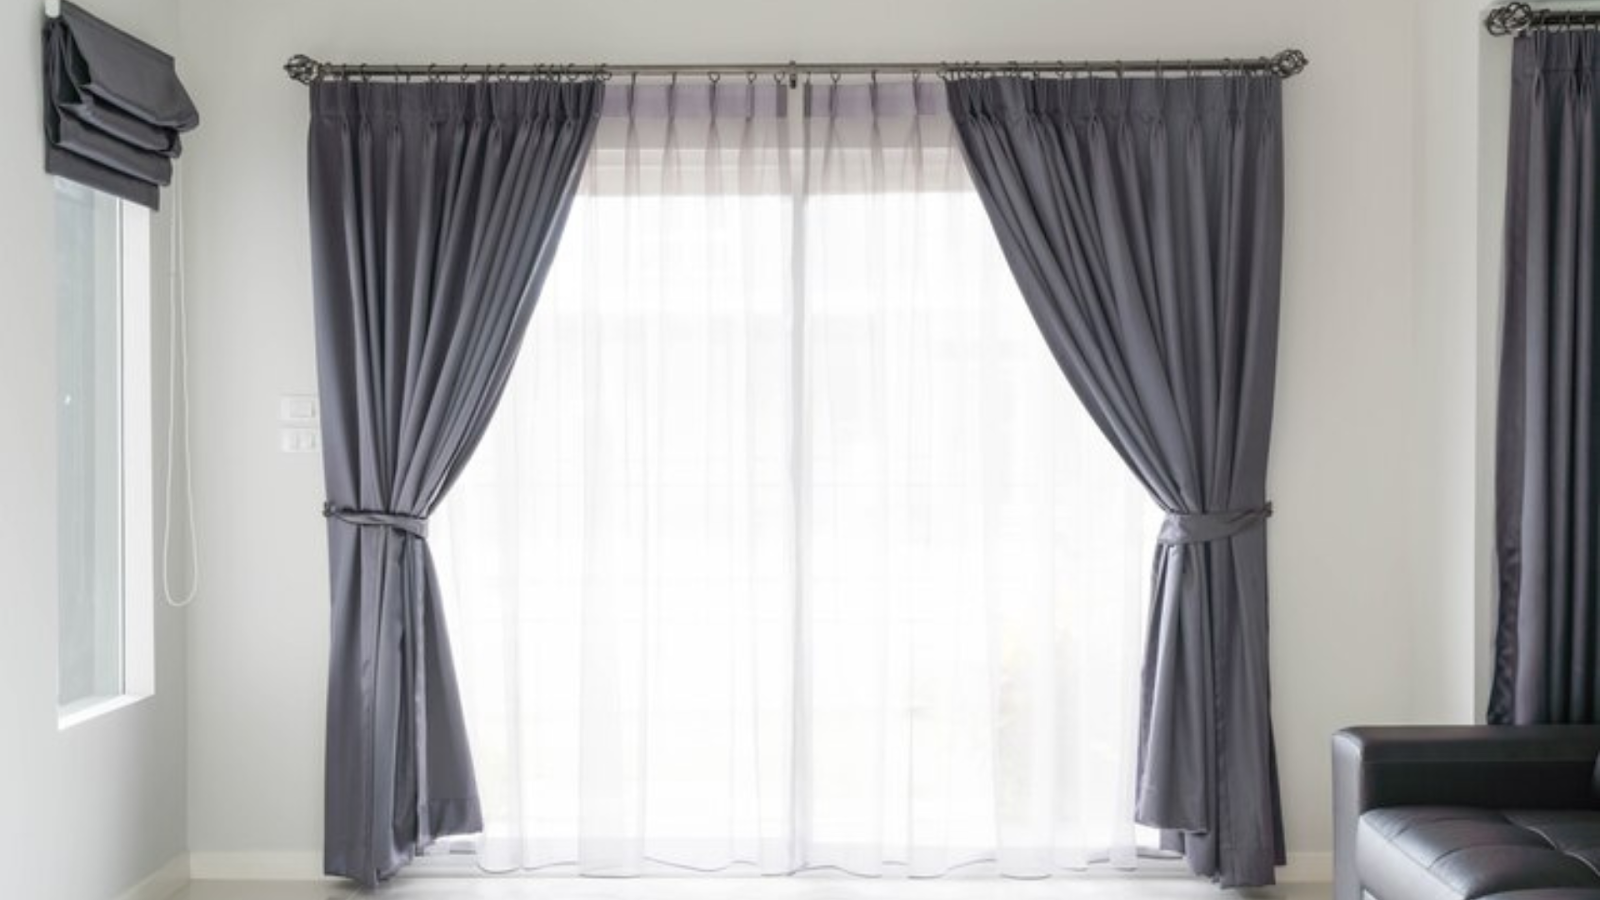 Enhance your space with style! Hang heavier curtains for a cozy and chic touch.